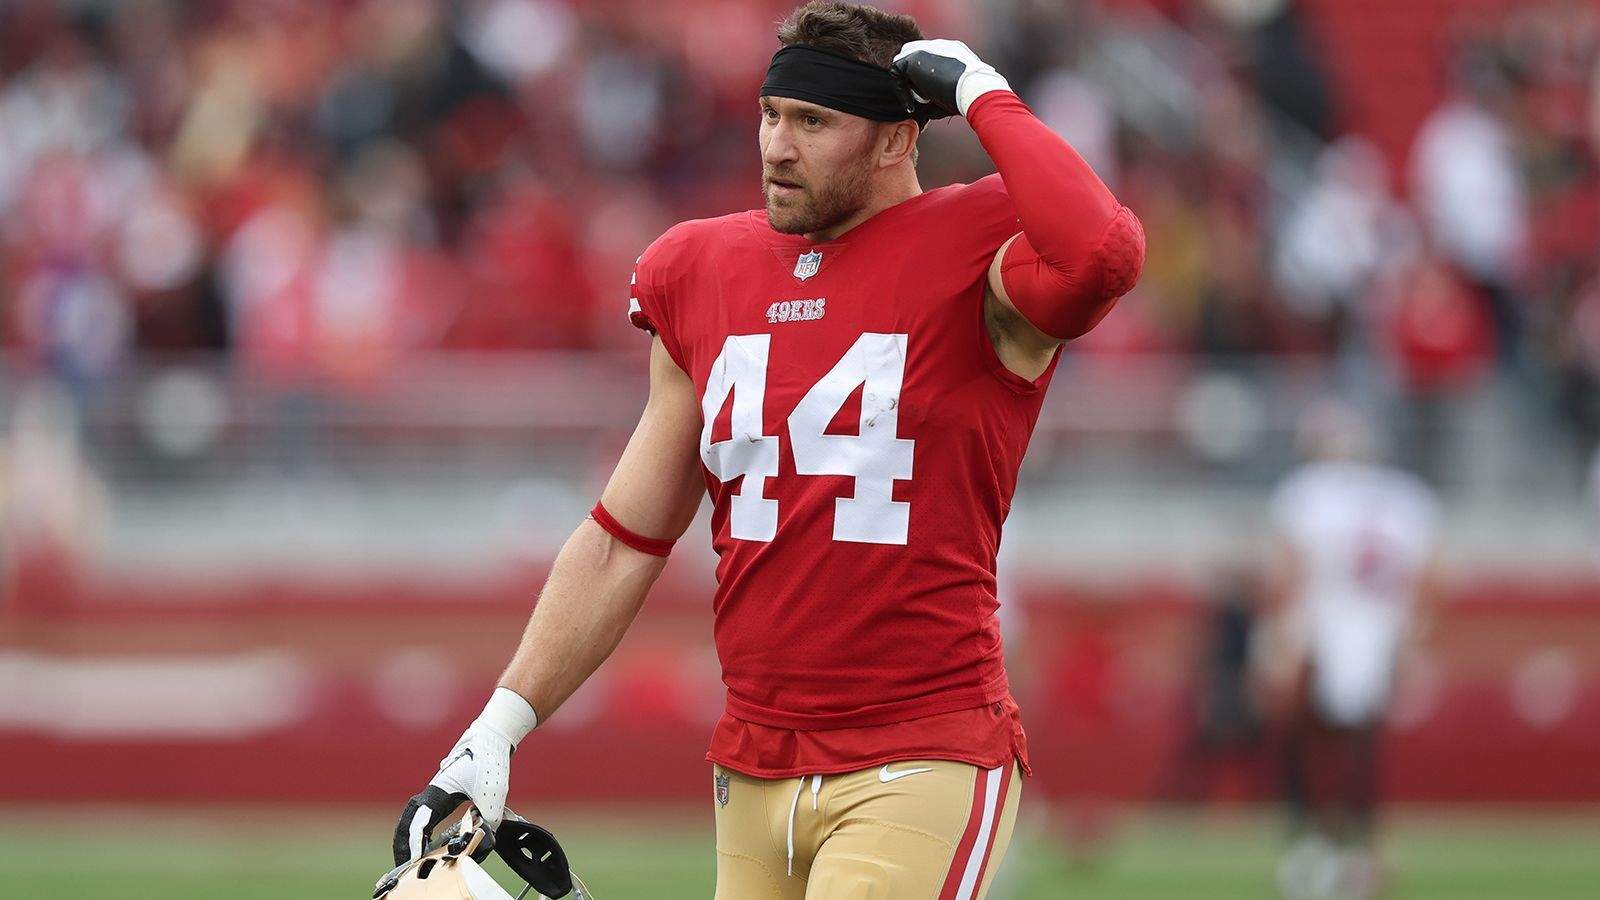 
                <strong>Fullback: Kyle Juszczyk</strong><br>
                &#x2022; Aktuelle Franchise: San Francisco 49ers<br>&#x2022; In der NFL seit: 2013<br>
              